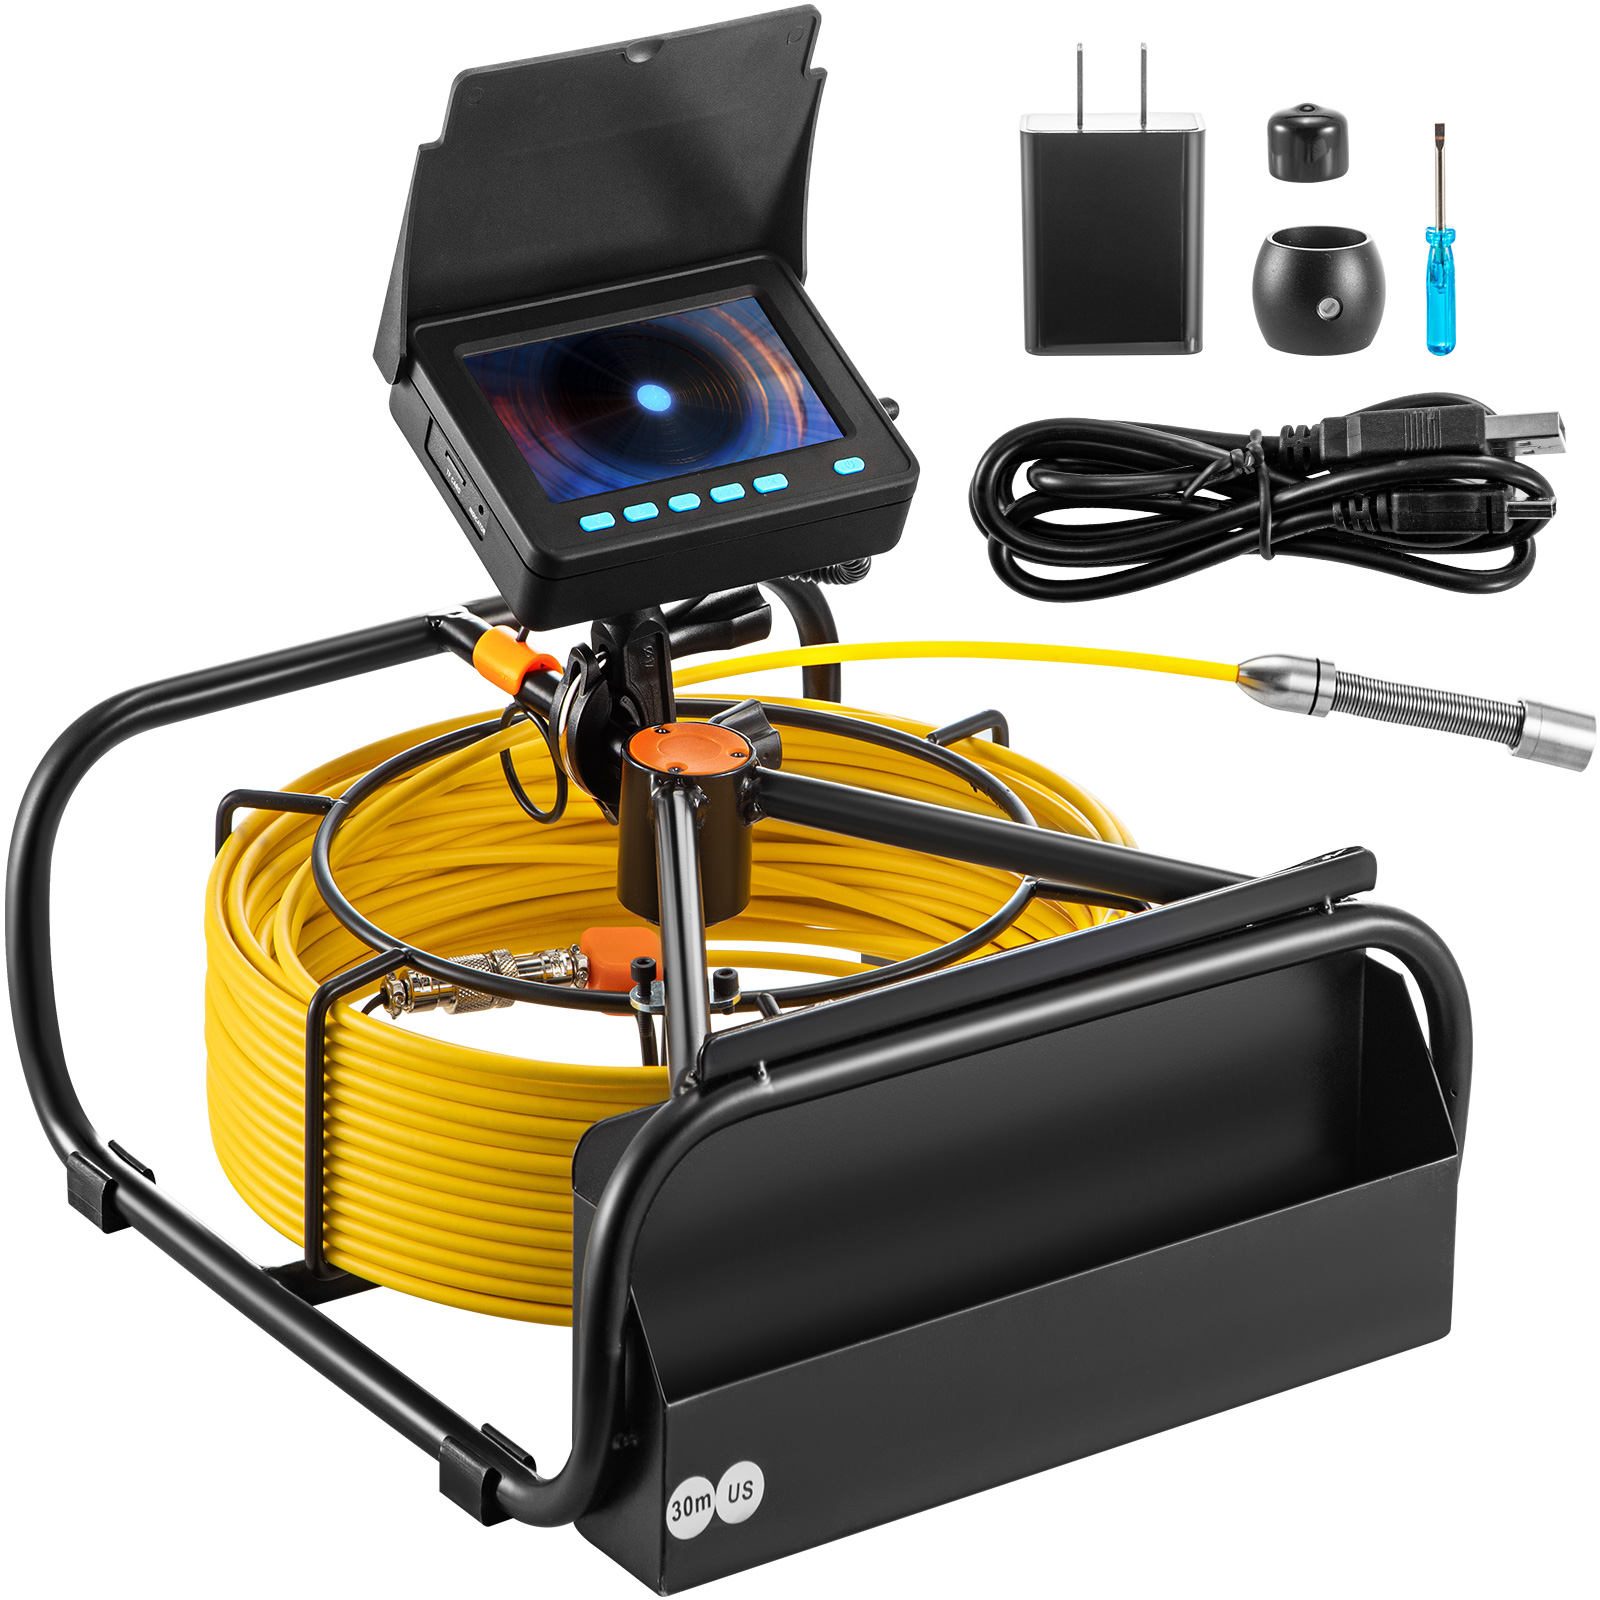 Pipe Inspection Camera, 30M / 98.4FT Cable, 4.3 In. Monitor